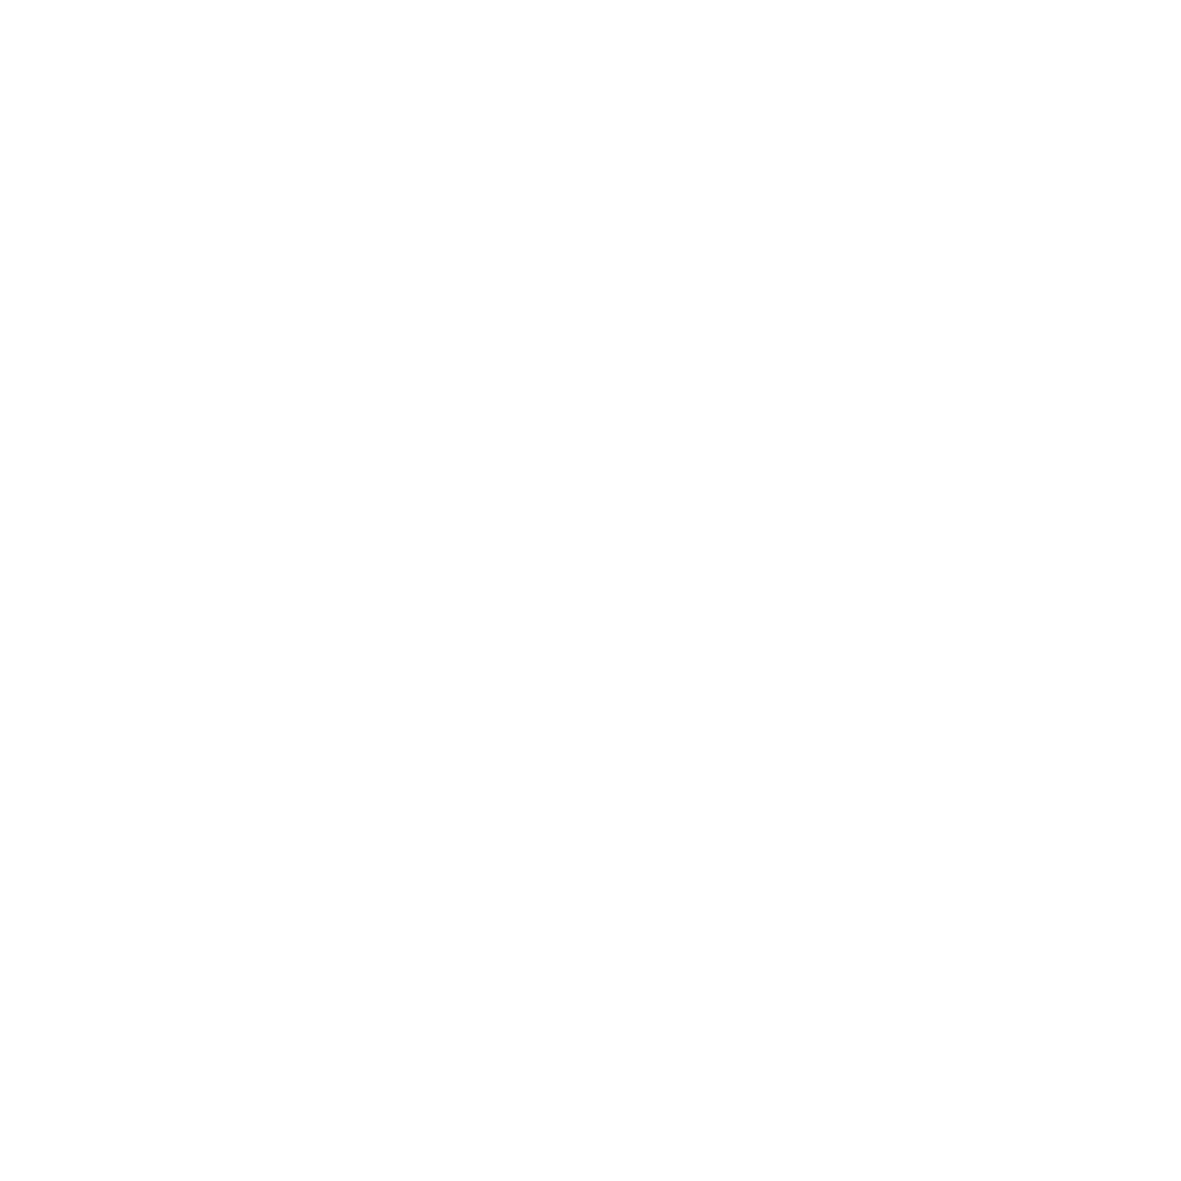 Cloud providers for hosting of application